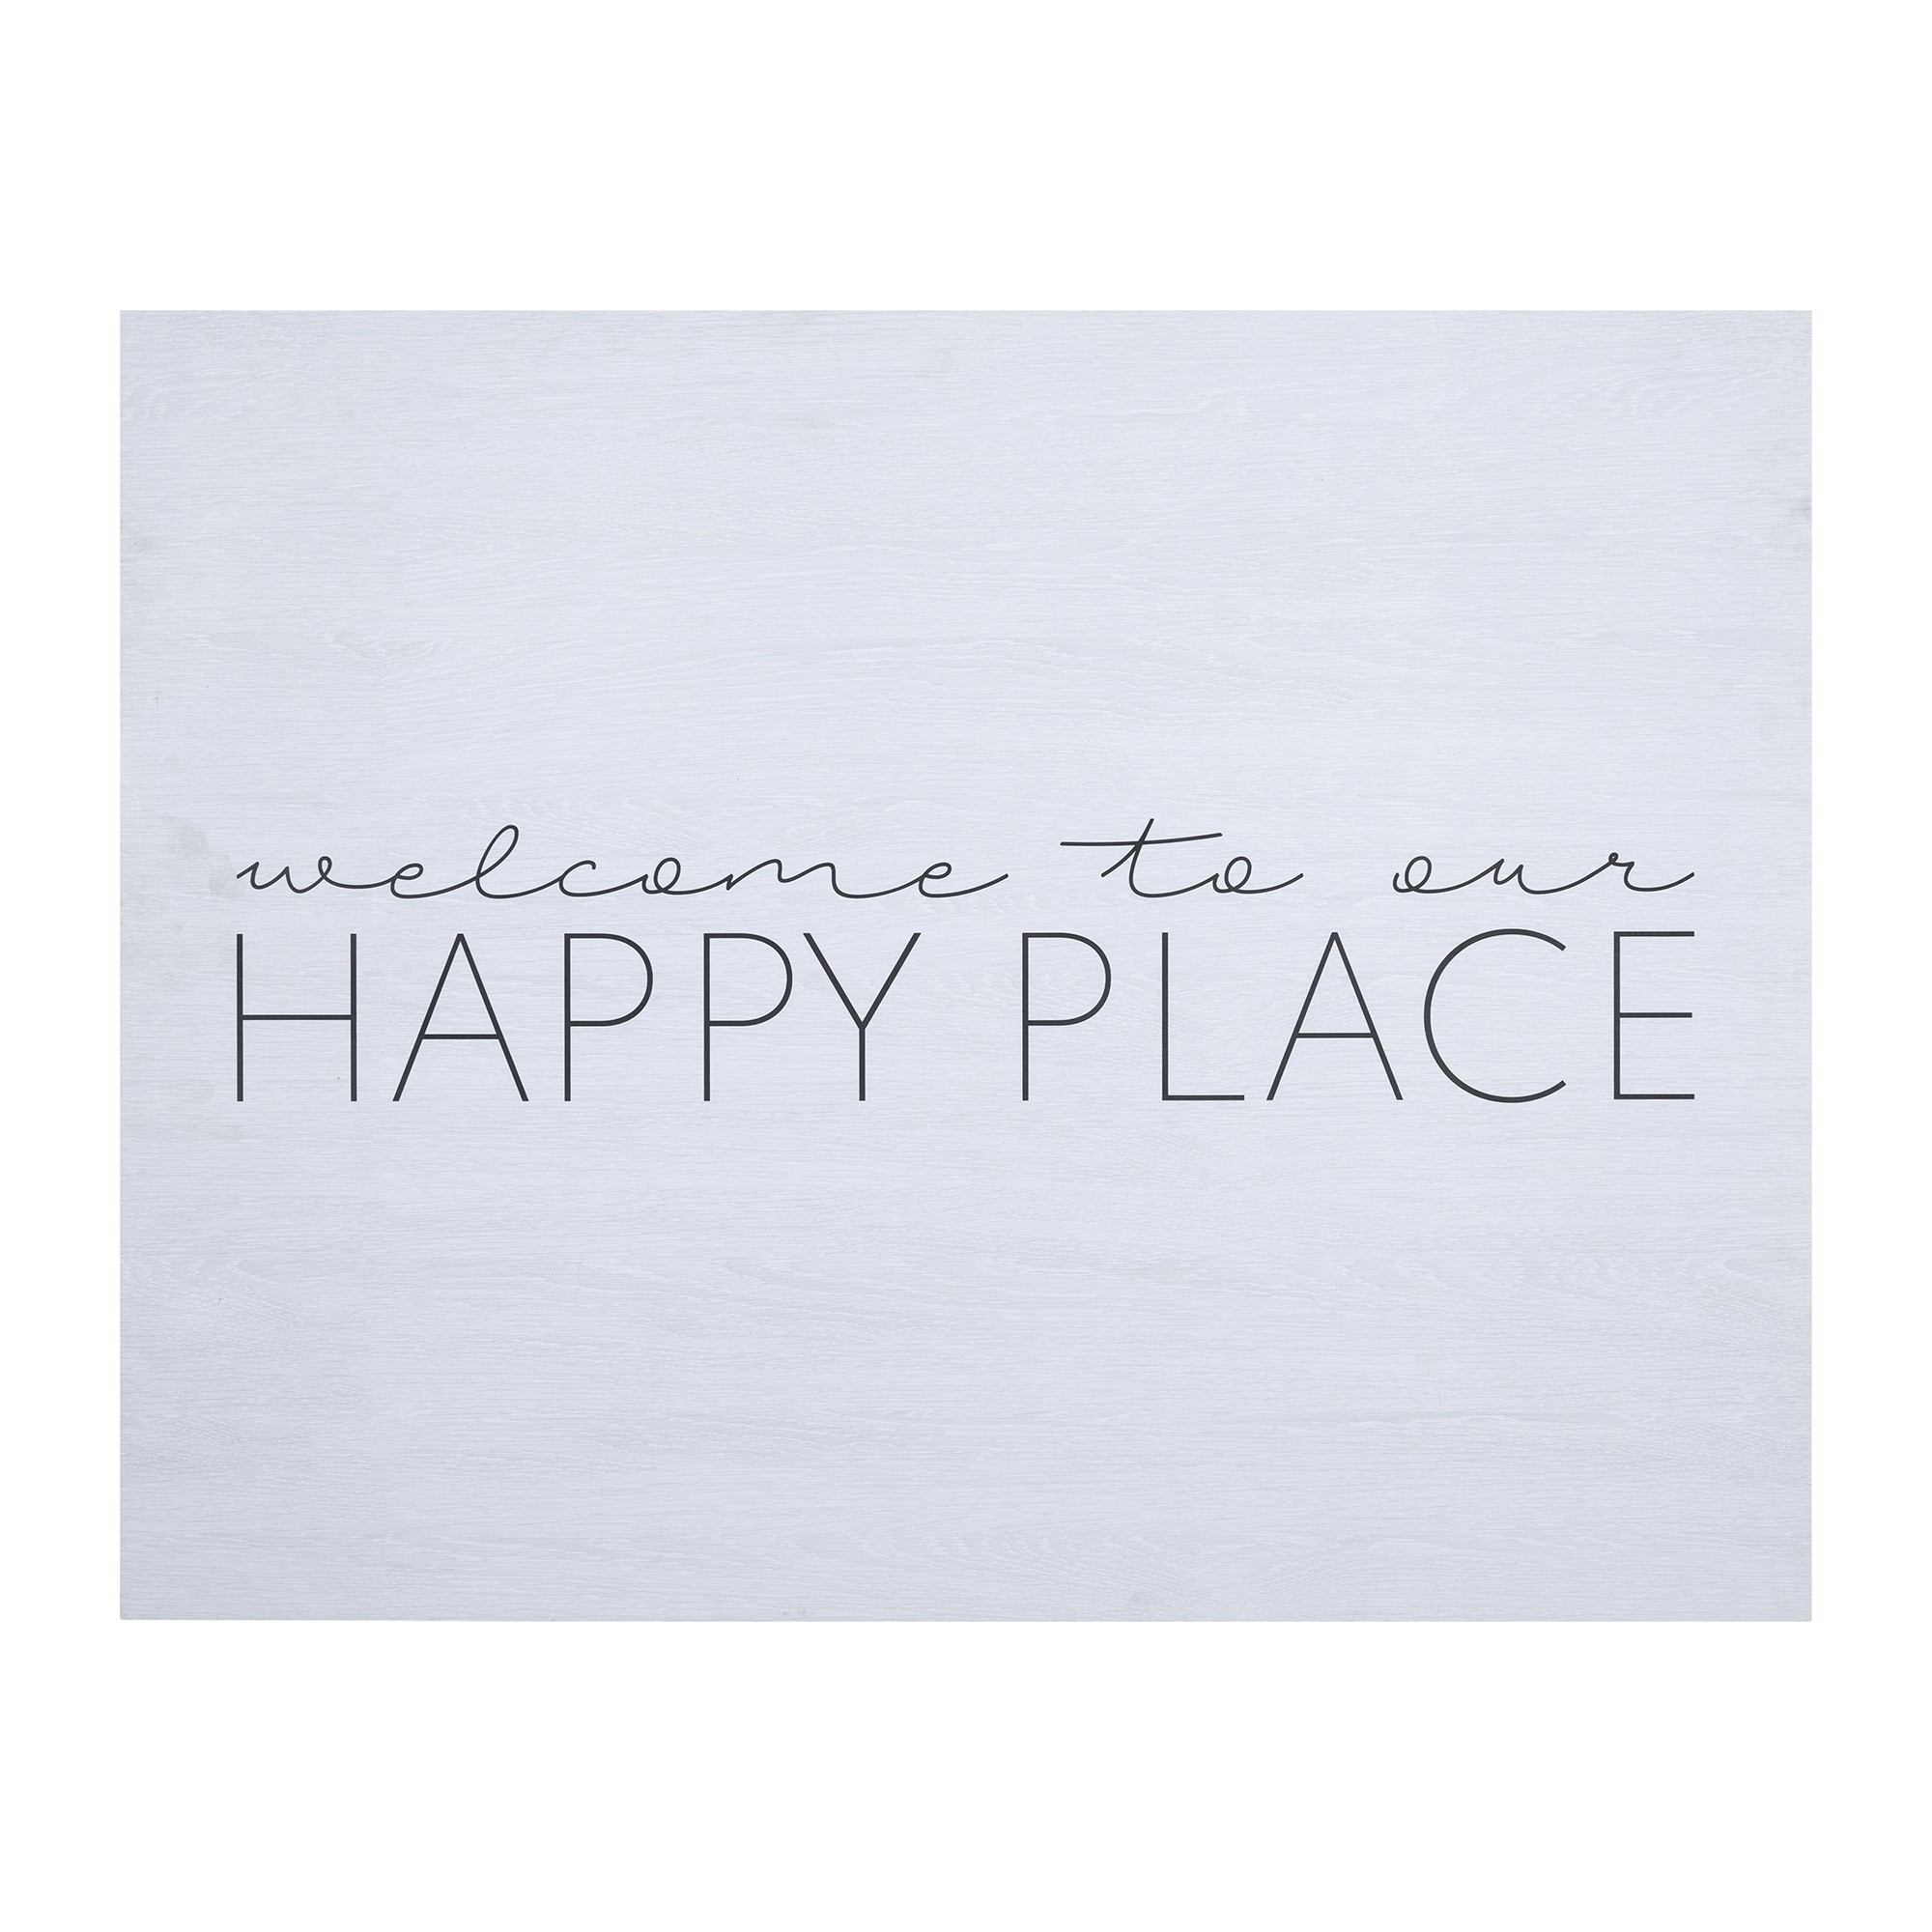 Welcome To Our Happy Place Wall Art